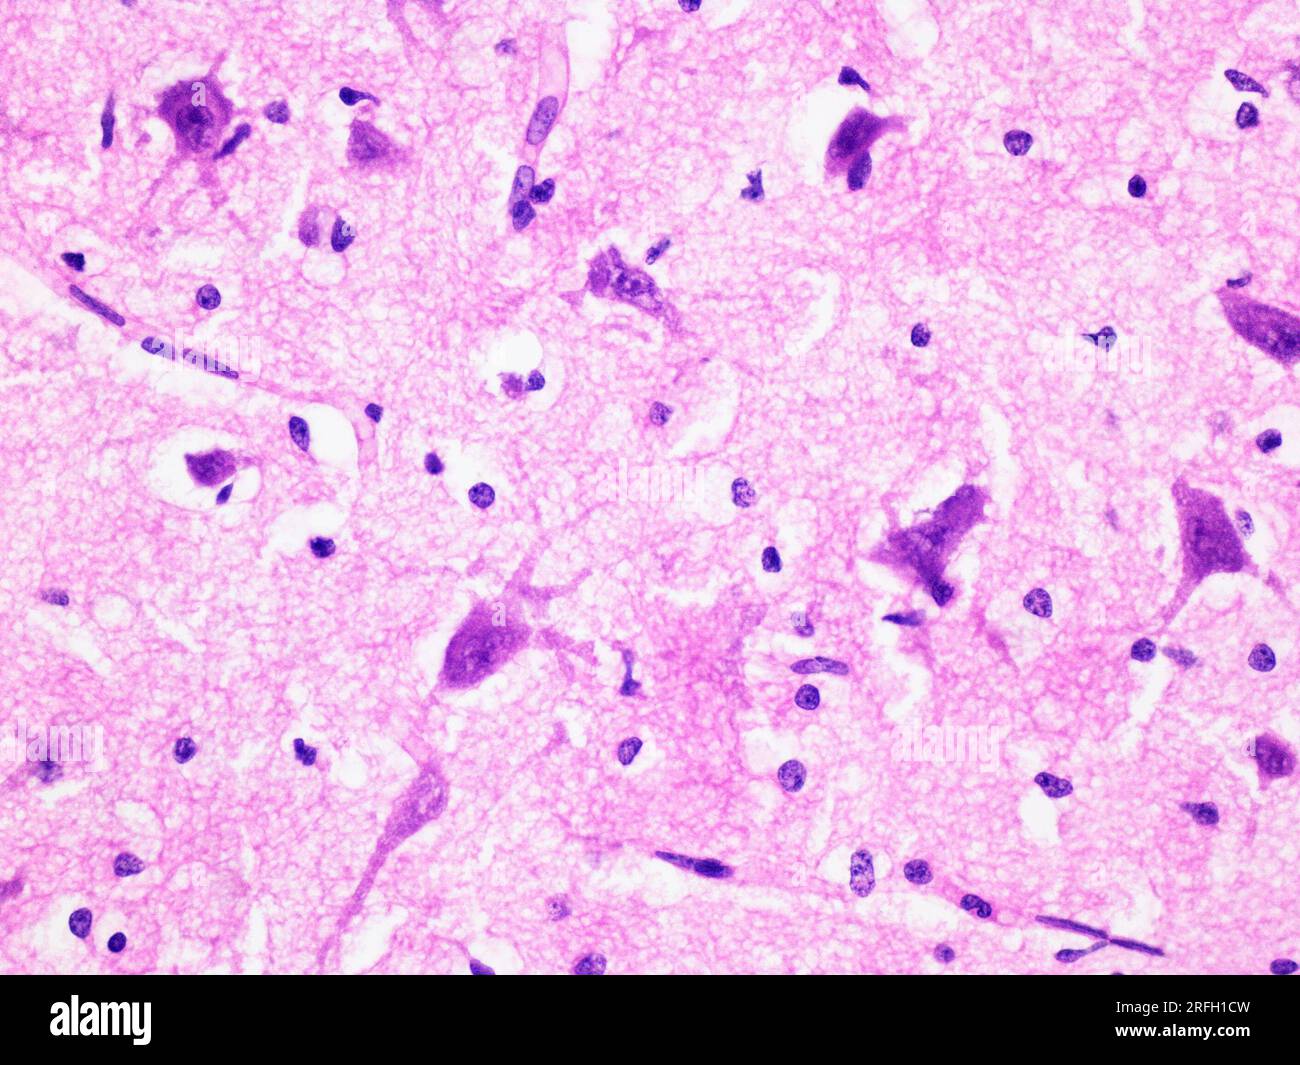 Histology of Human Brain Tissue Viewed at 400x Magnification with Haematoxylin and Eosin Staining. Stock Photo